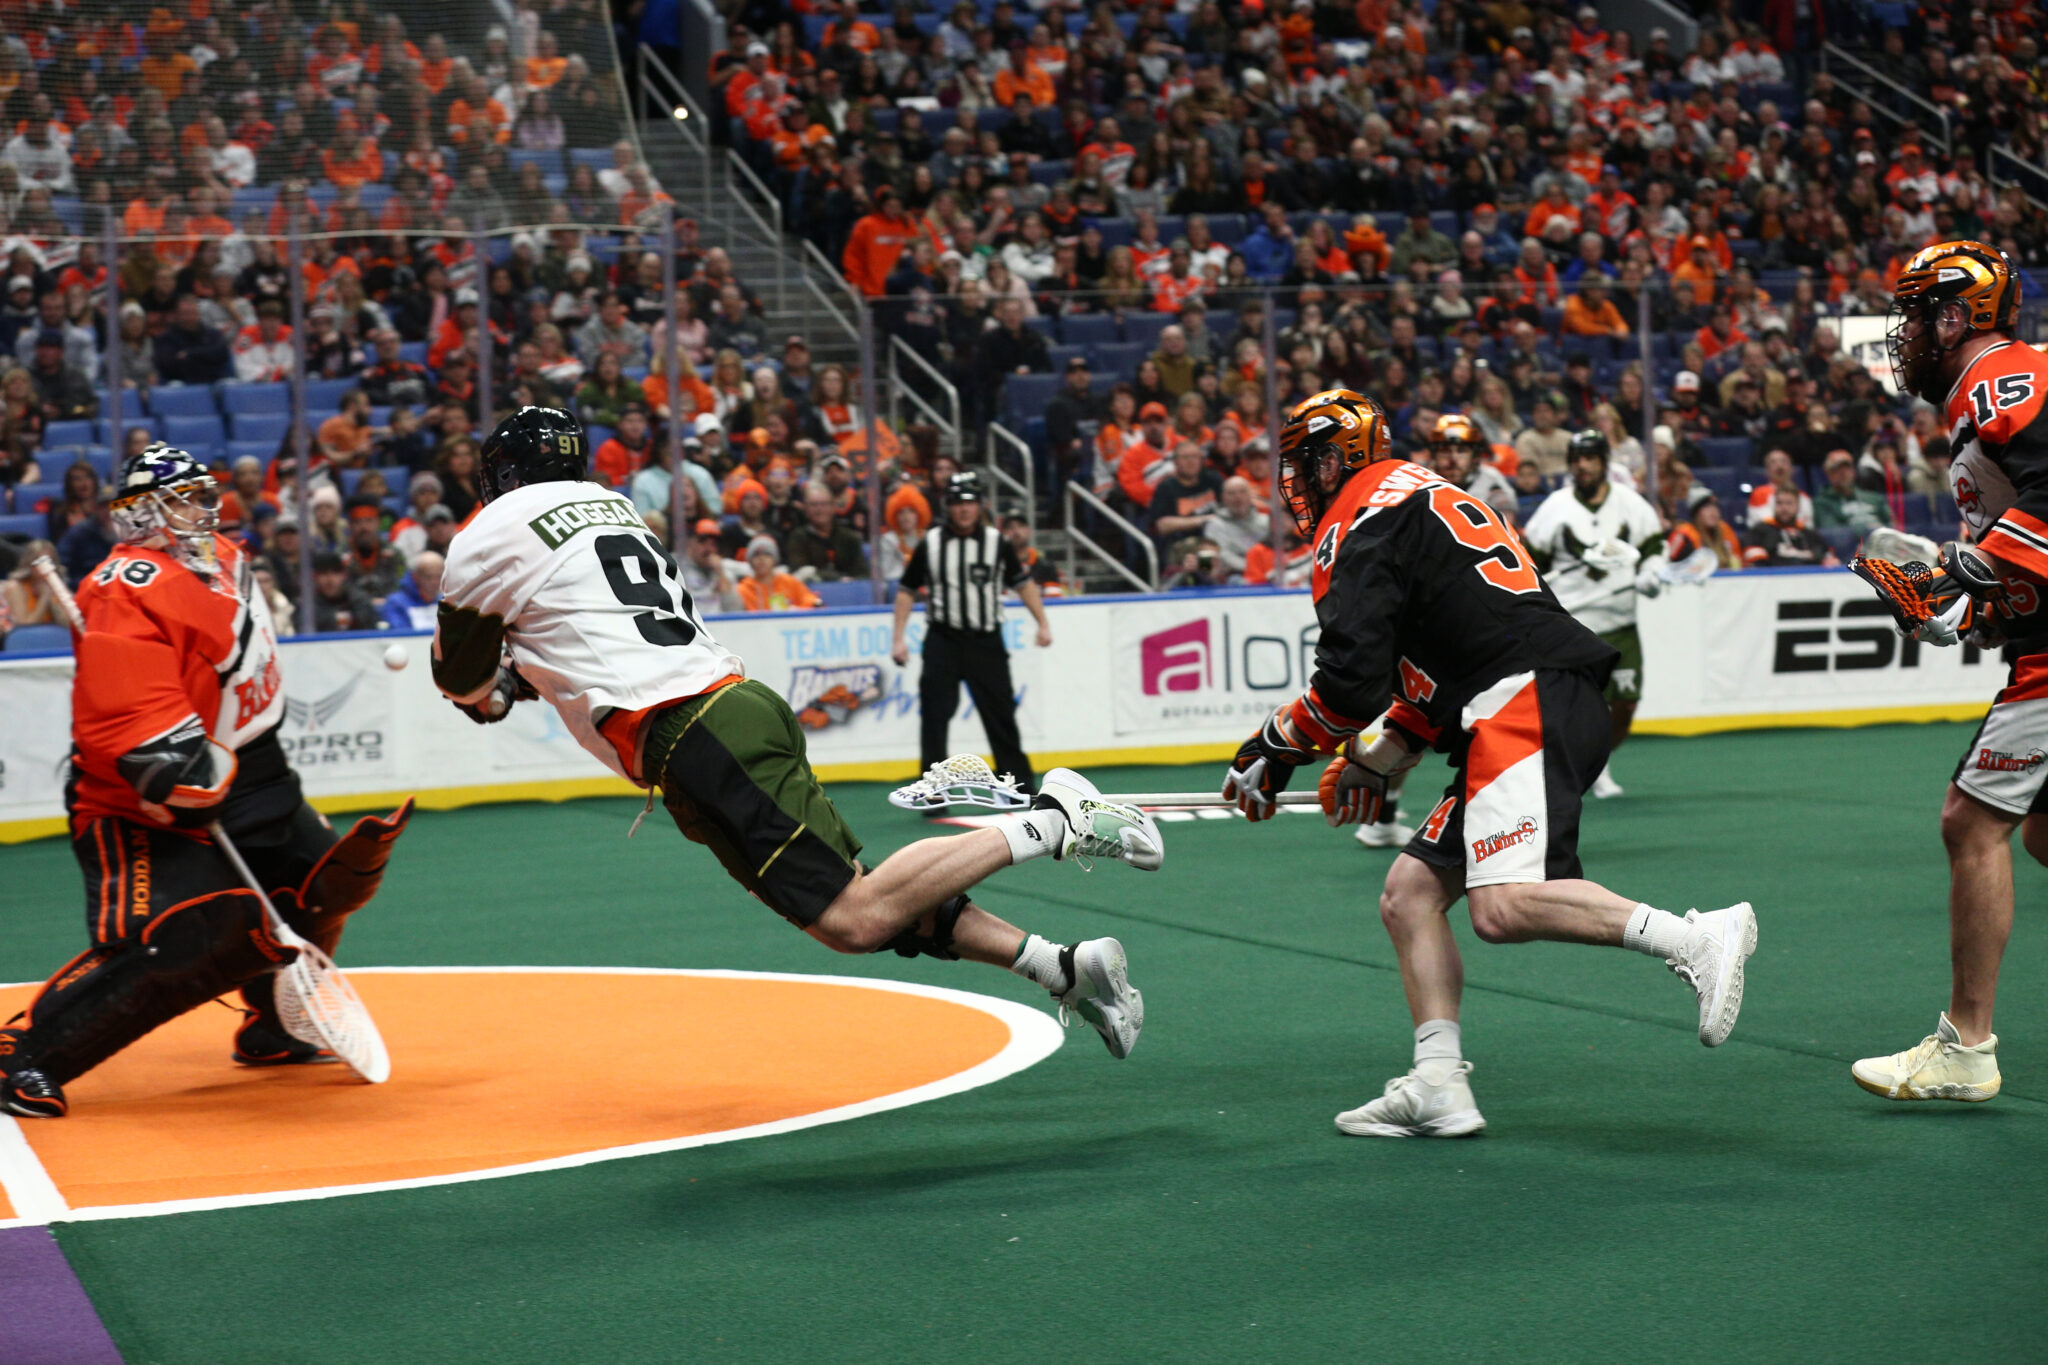 KNIGHTHAWKS TO FACE BANDITS IN OPENING ROUND OF 2023 NLL PLAYOFFS